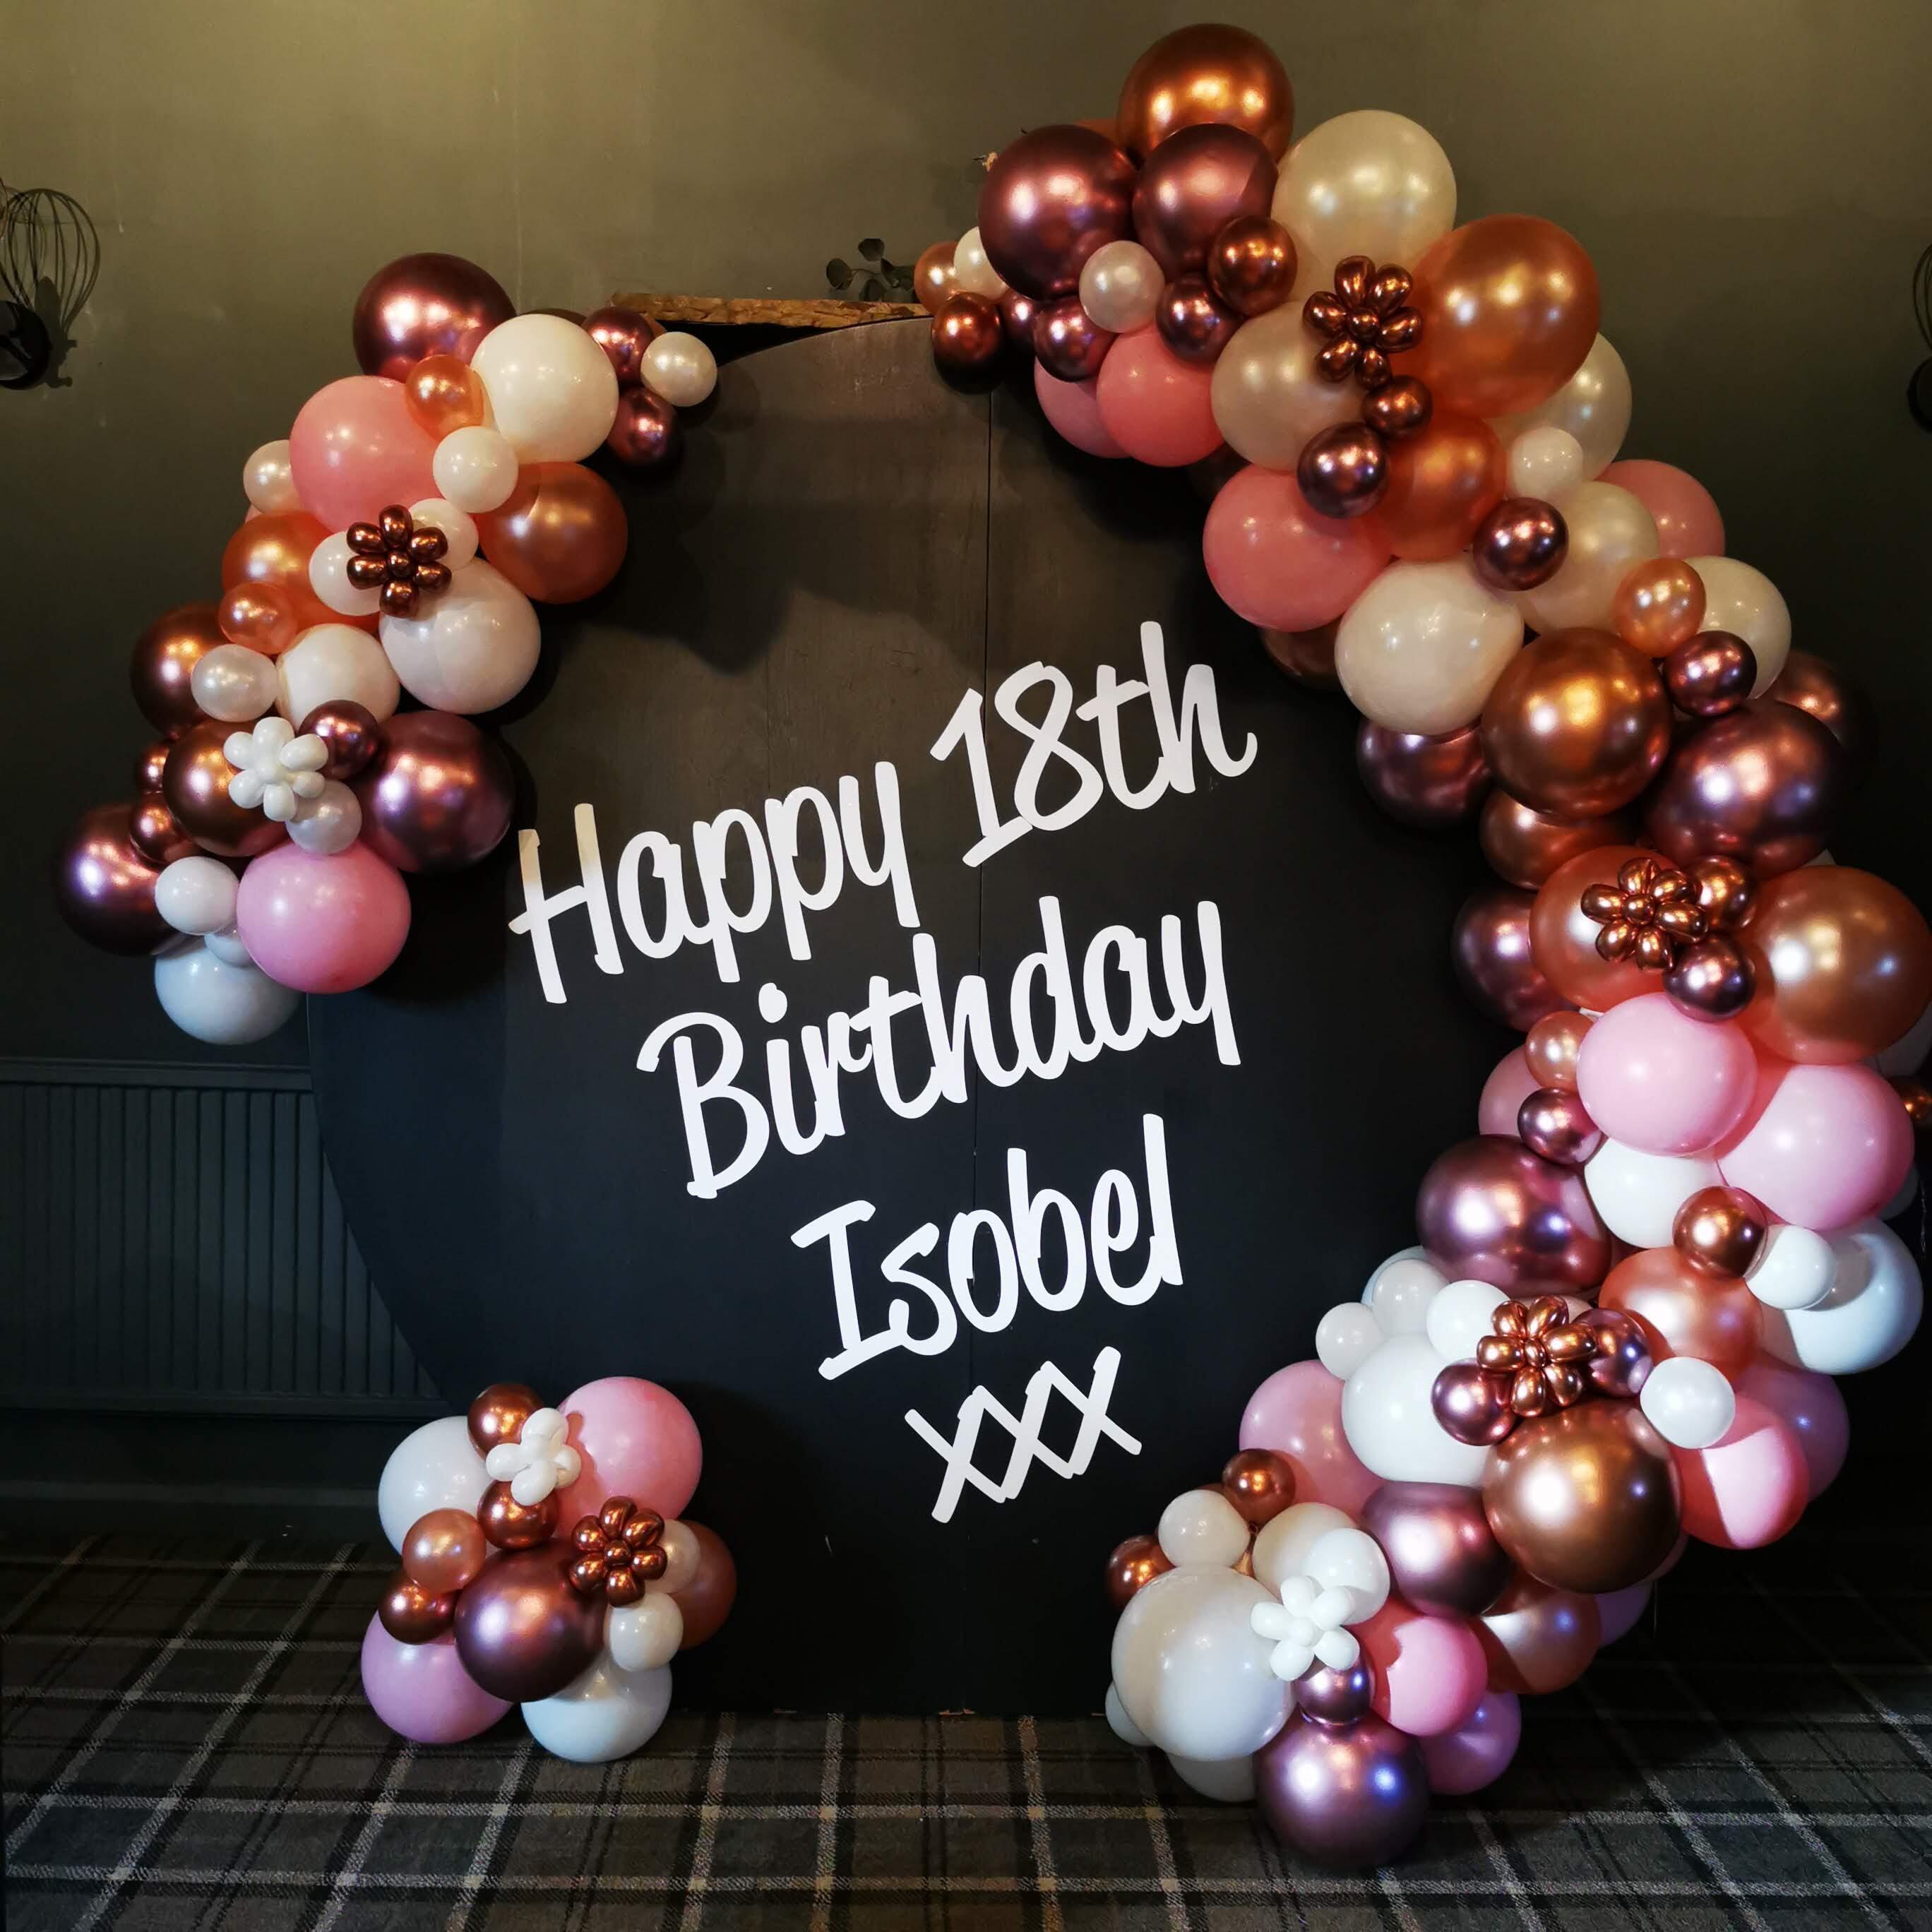 Huge balloon backboard at a birthday event in Yorkshire in rose gold, pink and white